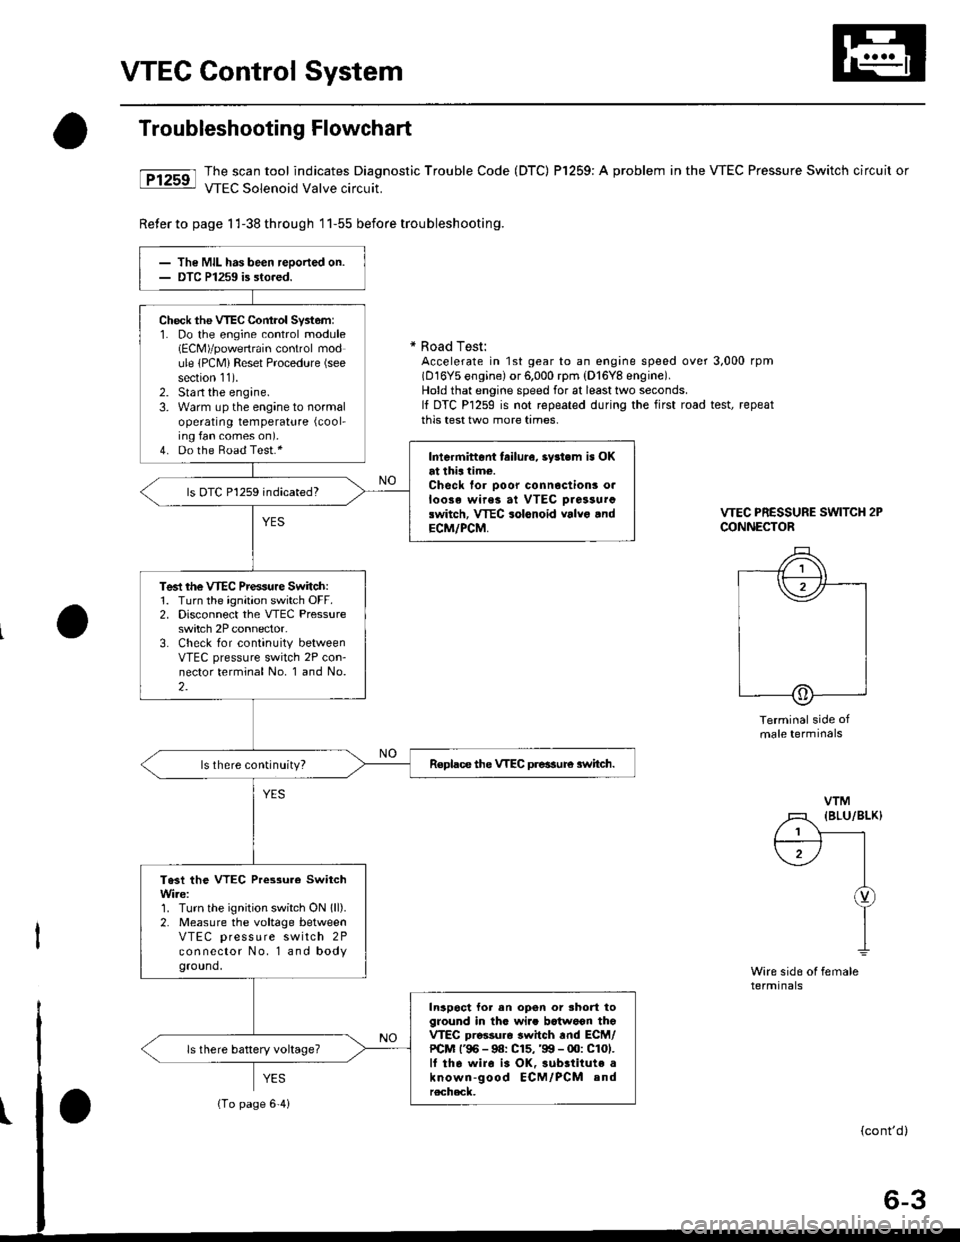 HONDA CIVIC 1997 6.G Repair Manual VTEC Control System
Troubleshooting Flowchart
tFtrsrl #ilH:::lj1t:"J:T,?ffnostic 
rrouble code (Drc) Pr25e: A probrem in the vrEc Pressure switch circuit or
Reter to page 1 l-38 th roug h 1 1-55 befor